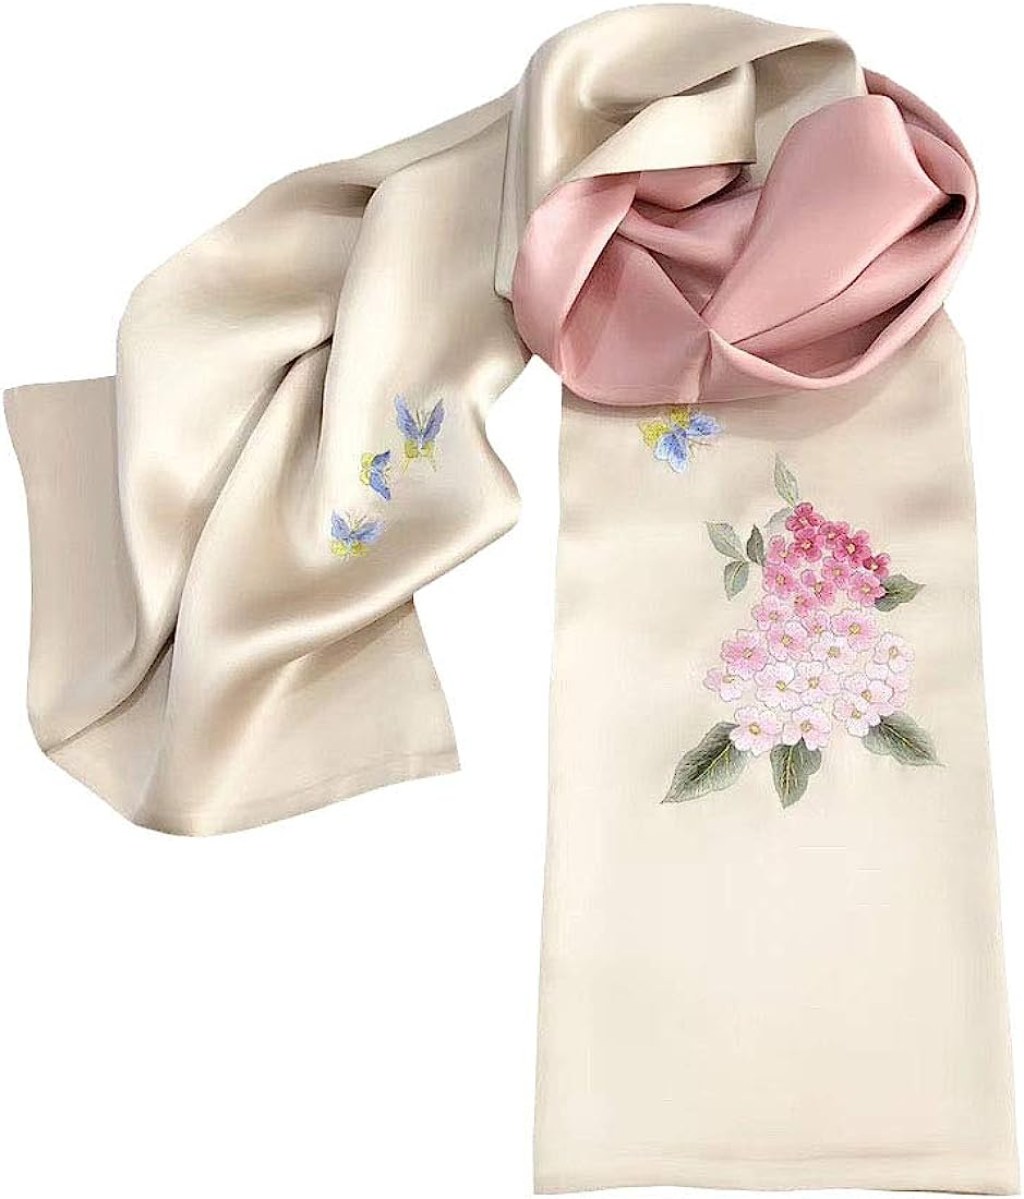 Picture of: HangErFeng Double Silk Scarf, Hand Embroidery, Chinese Traditional Hair  Scarf, Sun Protection Scarf, Gift Wrap